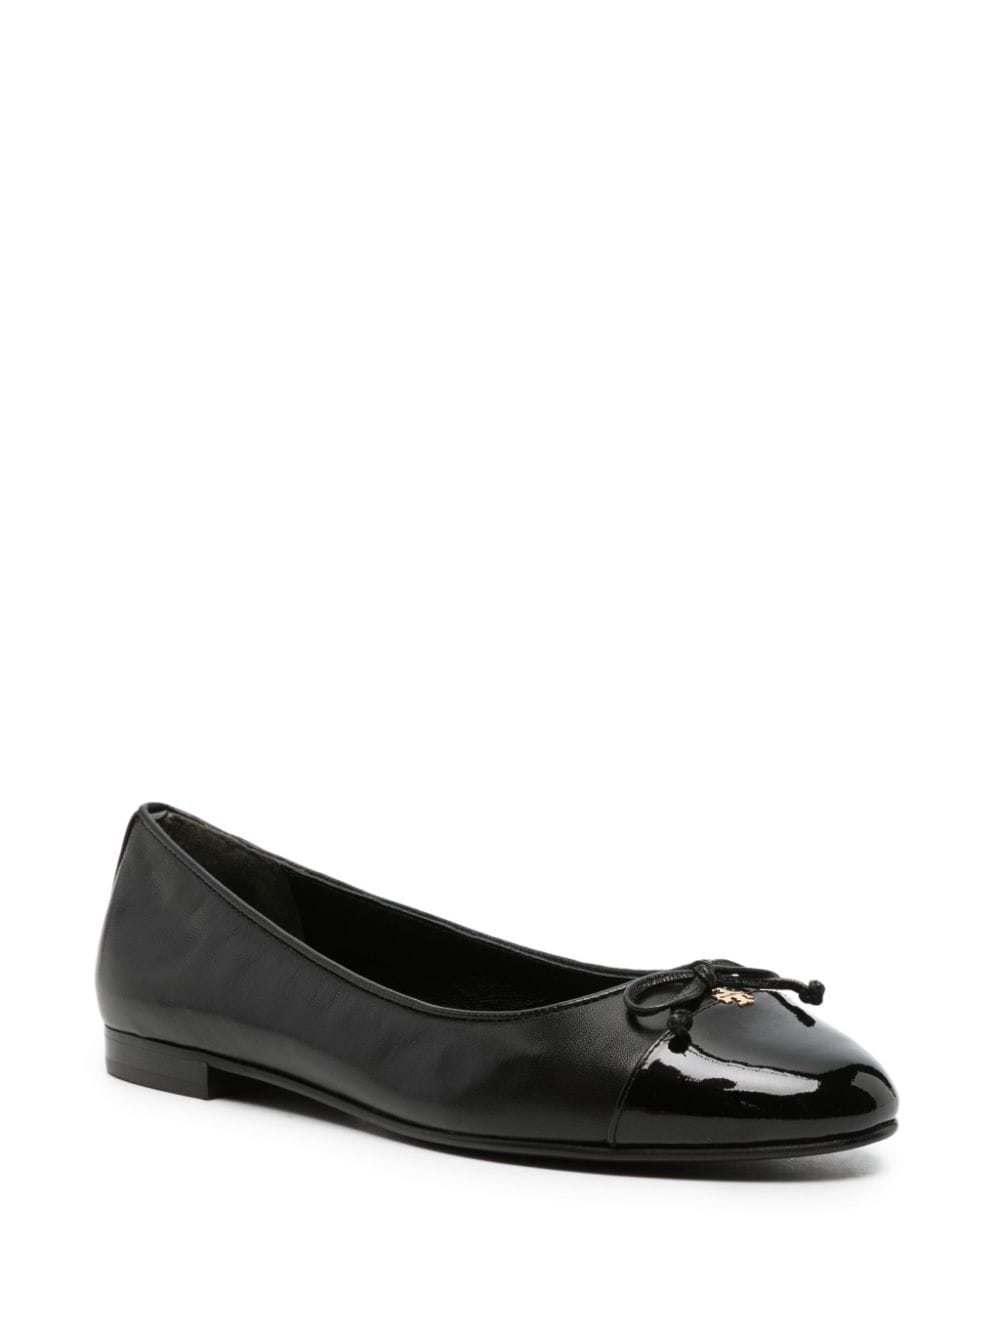 Tory Burch bow-detailing leather ballerina shoes - Zwart